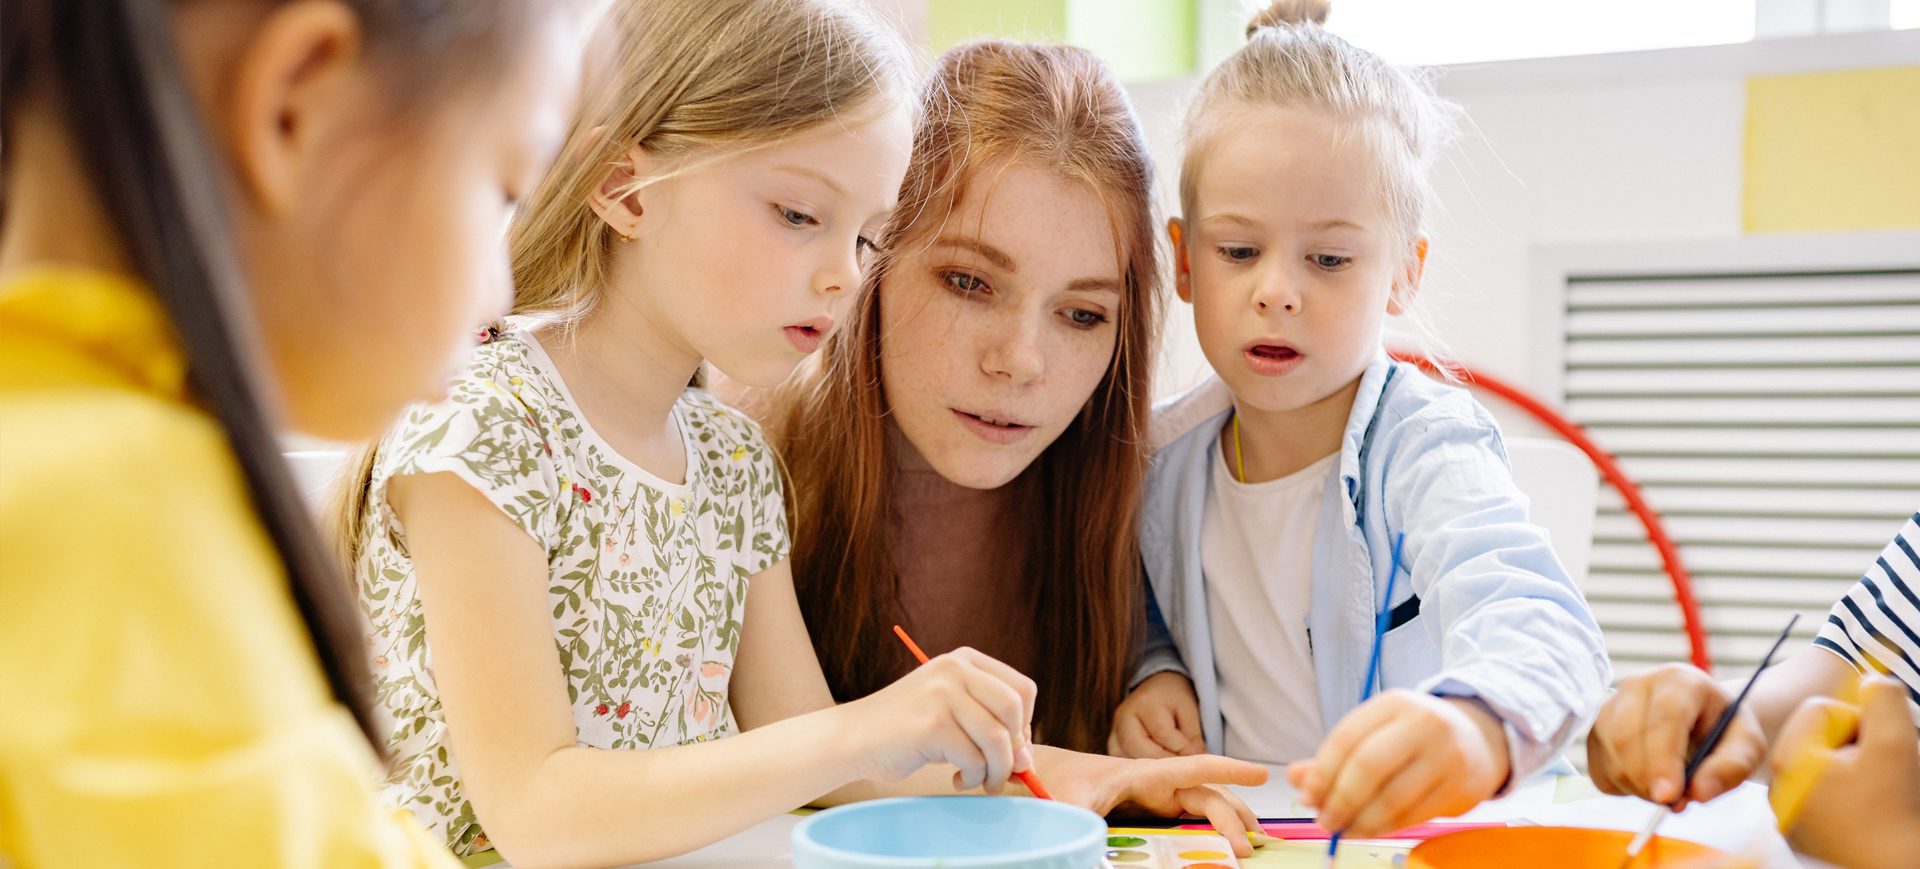 A woman and two young girls painting with paint.